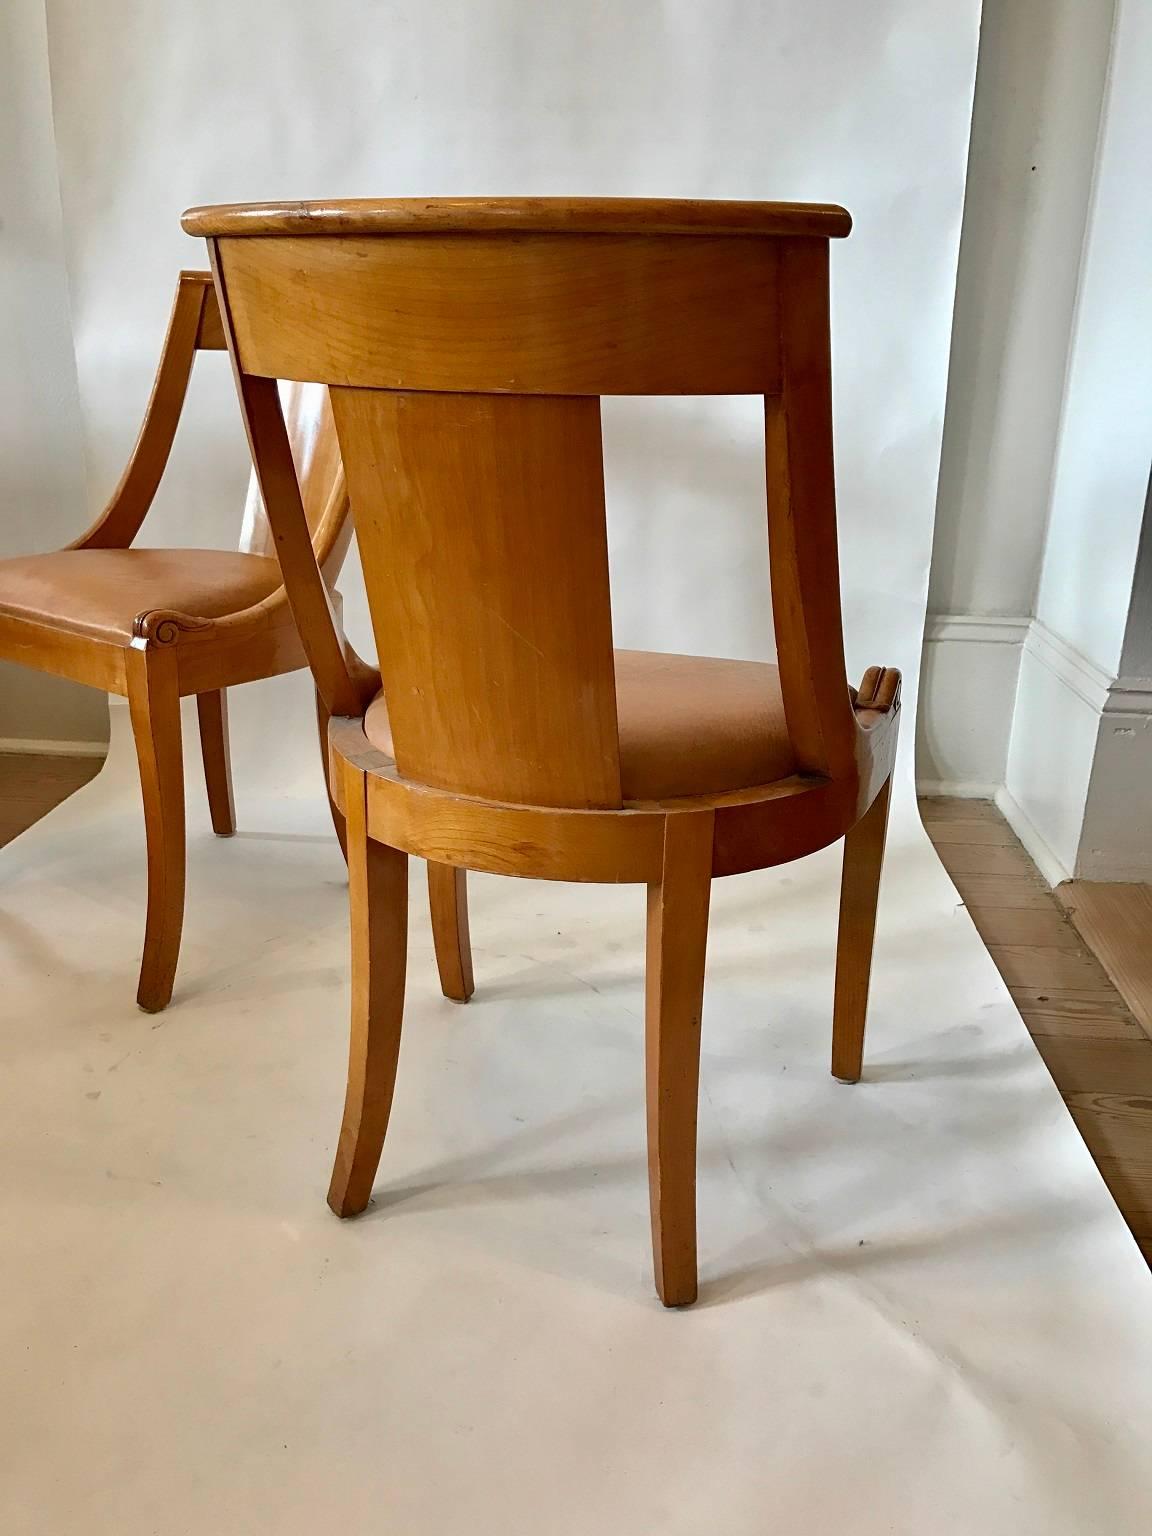 Eight fruitwood dining chairs in the Biedermeier taste; curved backs and saber front legs; leather upholstery at the slip seats, four shown.